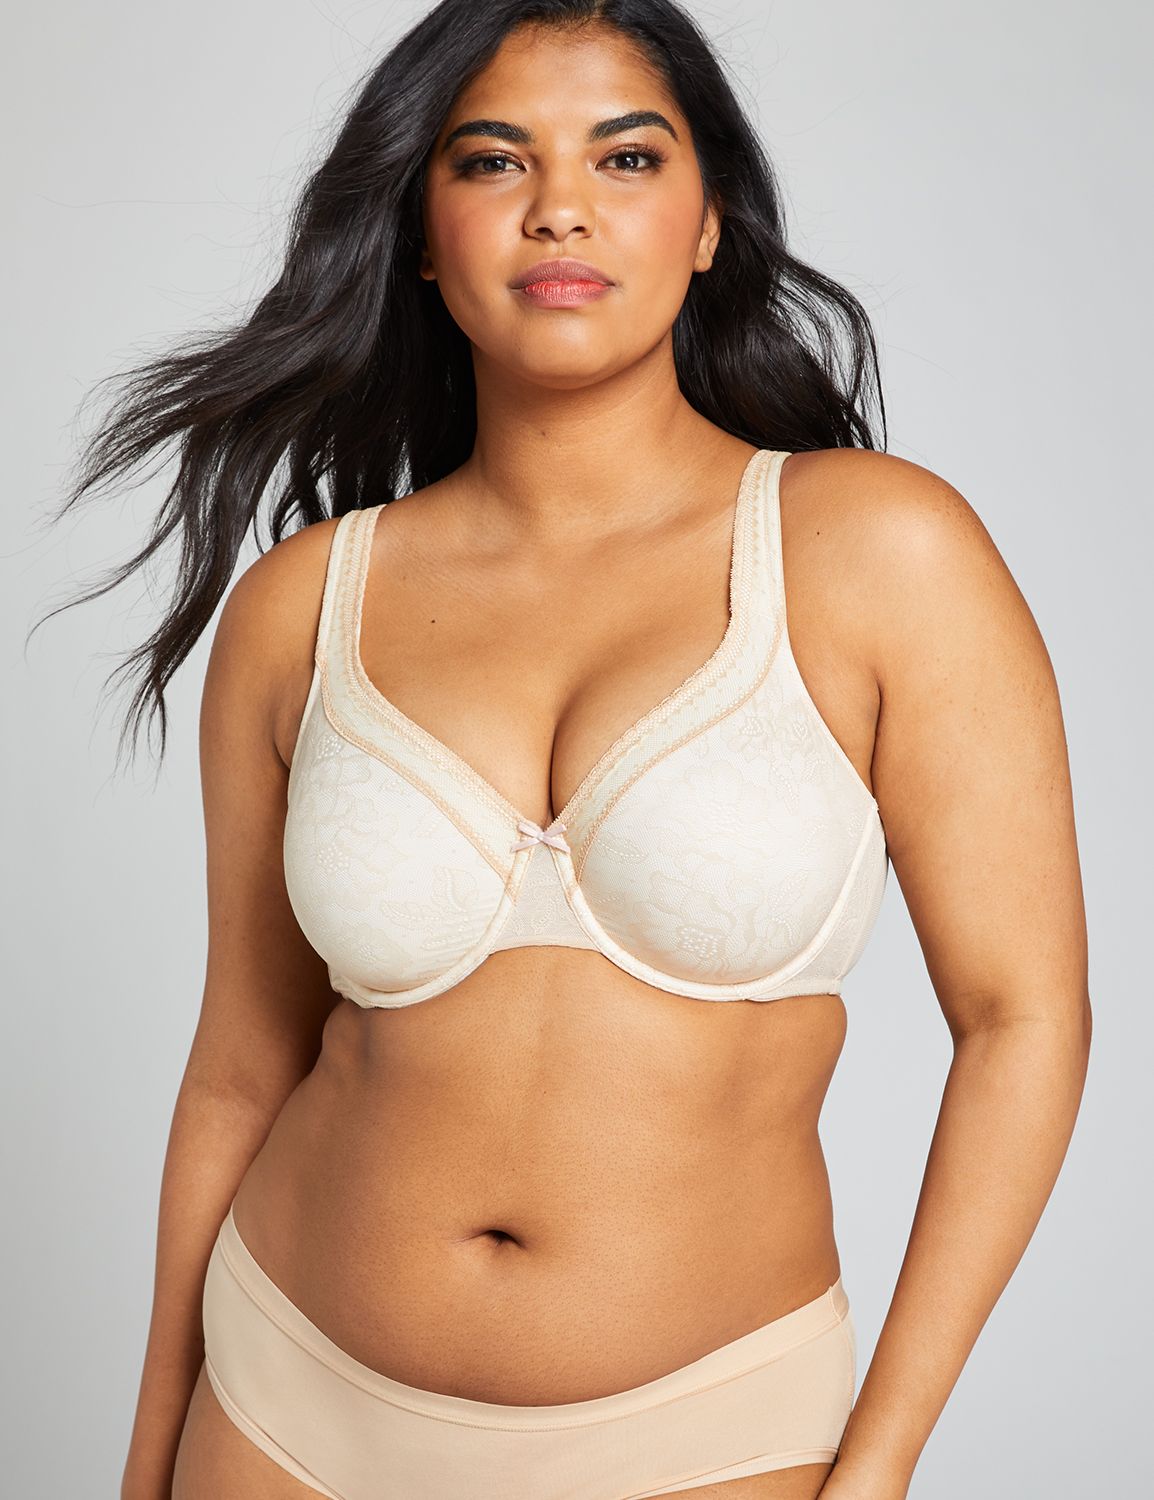 Lace Unlined Side Support Bra 36G, Hazel/Barely There